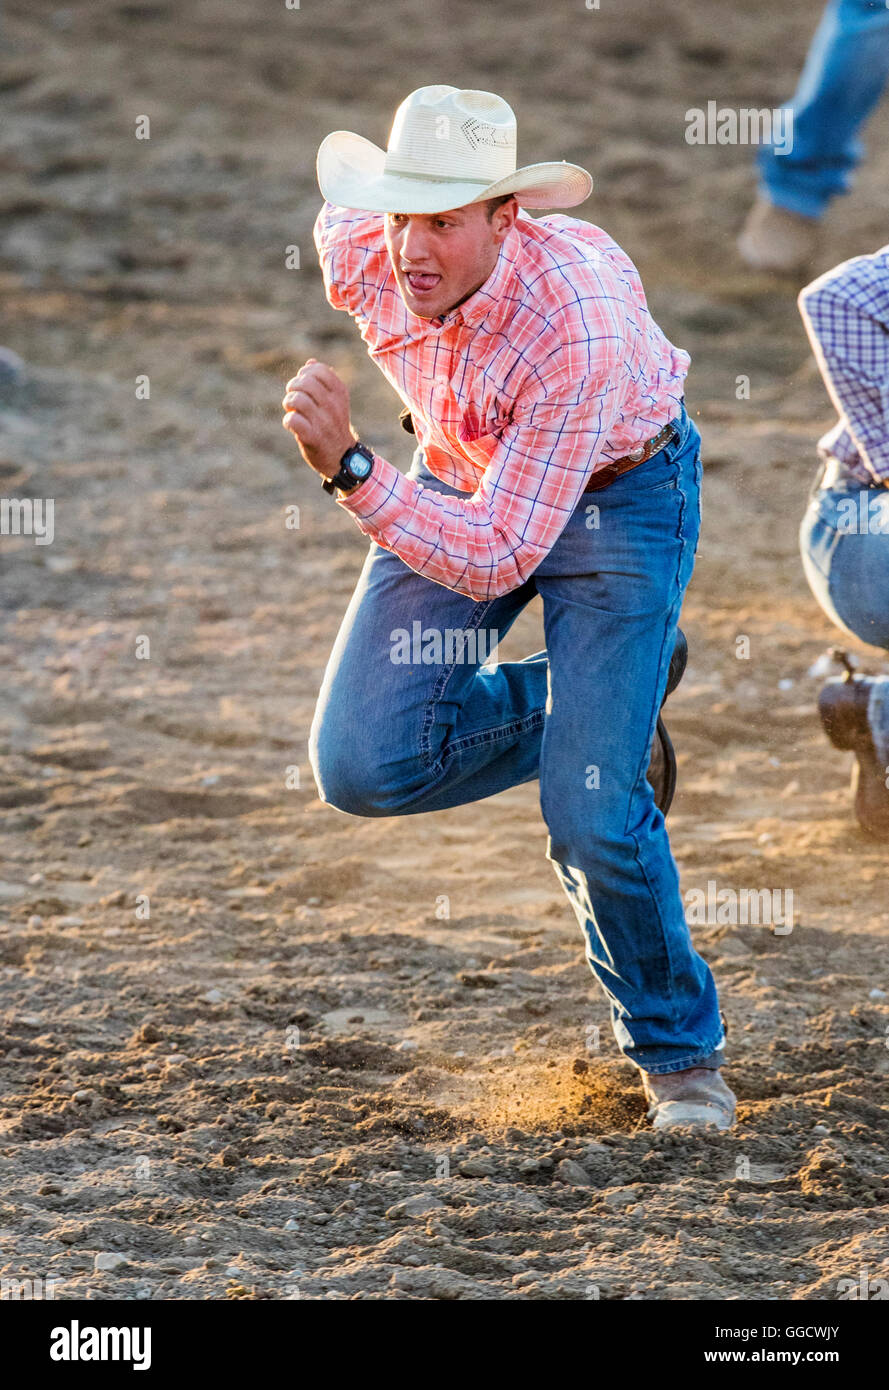 Cowboy running in team roping & branding competition; Chaffee County Fair & Rodeo, Salida, Colorado, USA Stock Photo